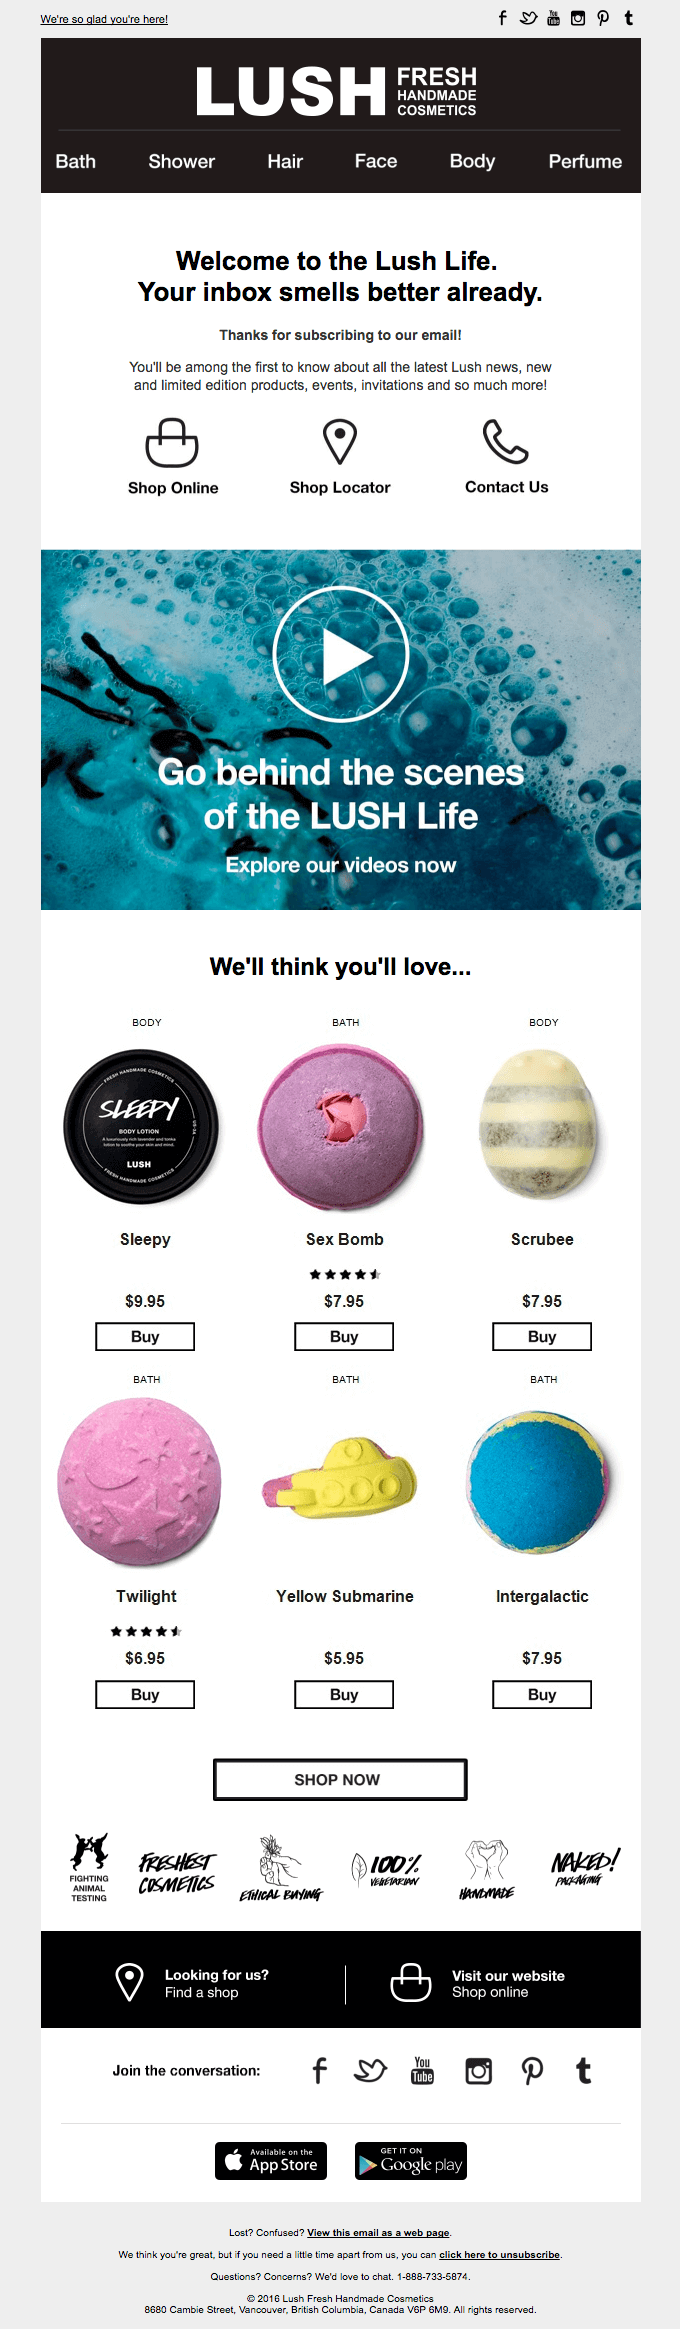 Lush Email Example